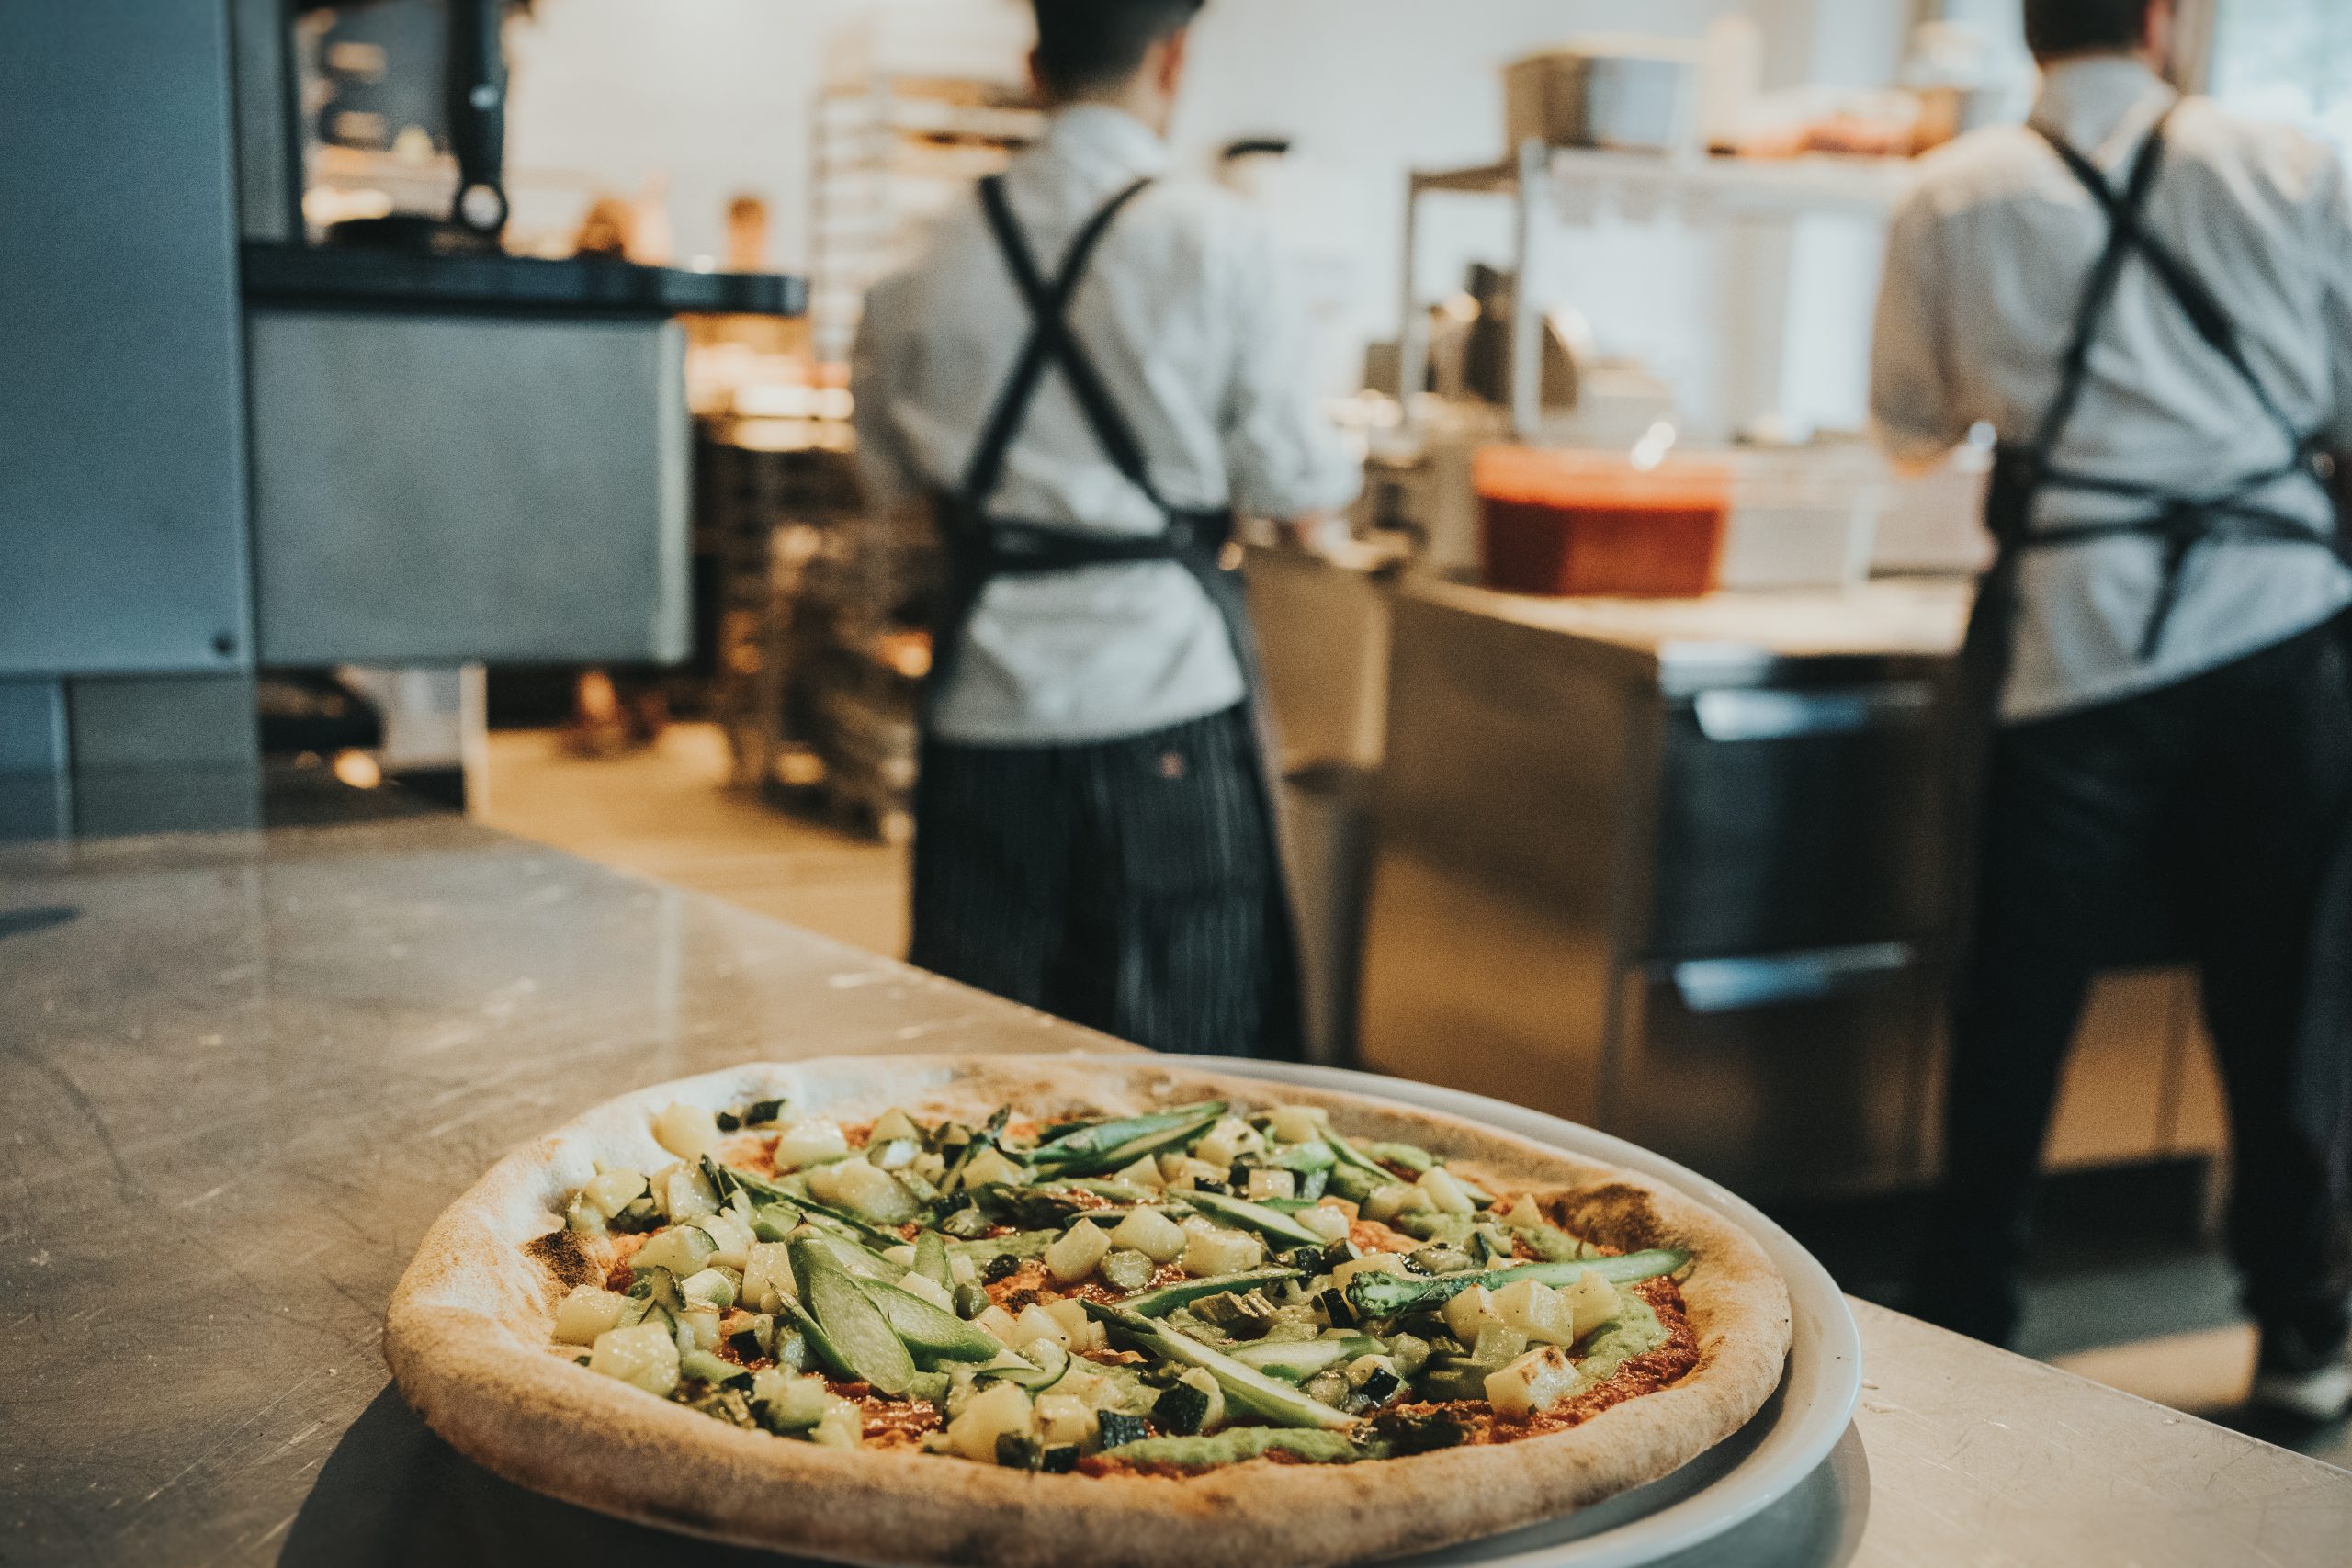 Jobs in Berlin, Sironi La Pizza is looking for a pizzaiolo